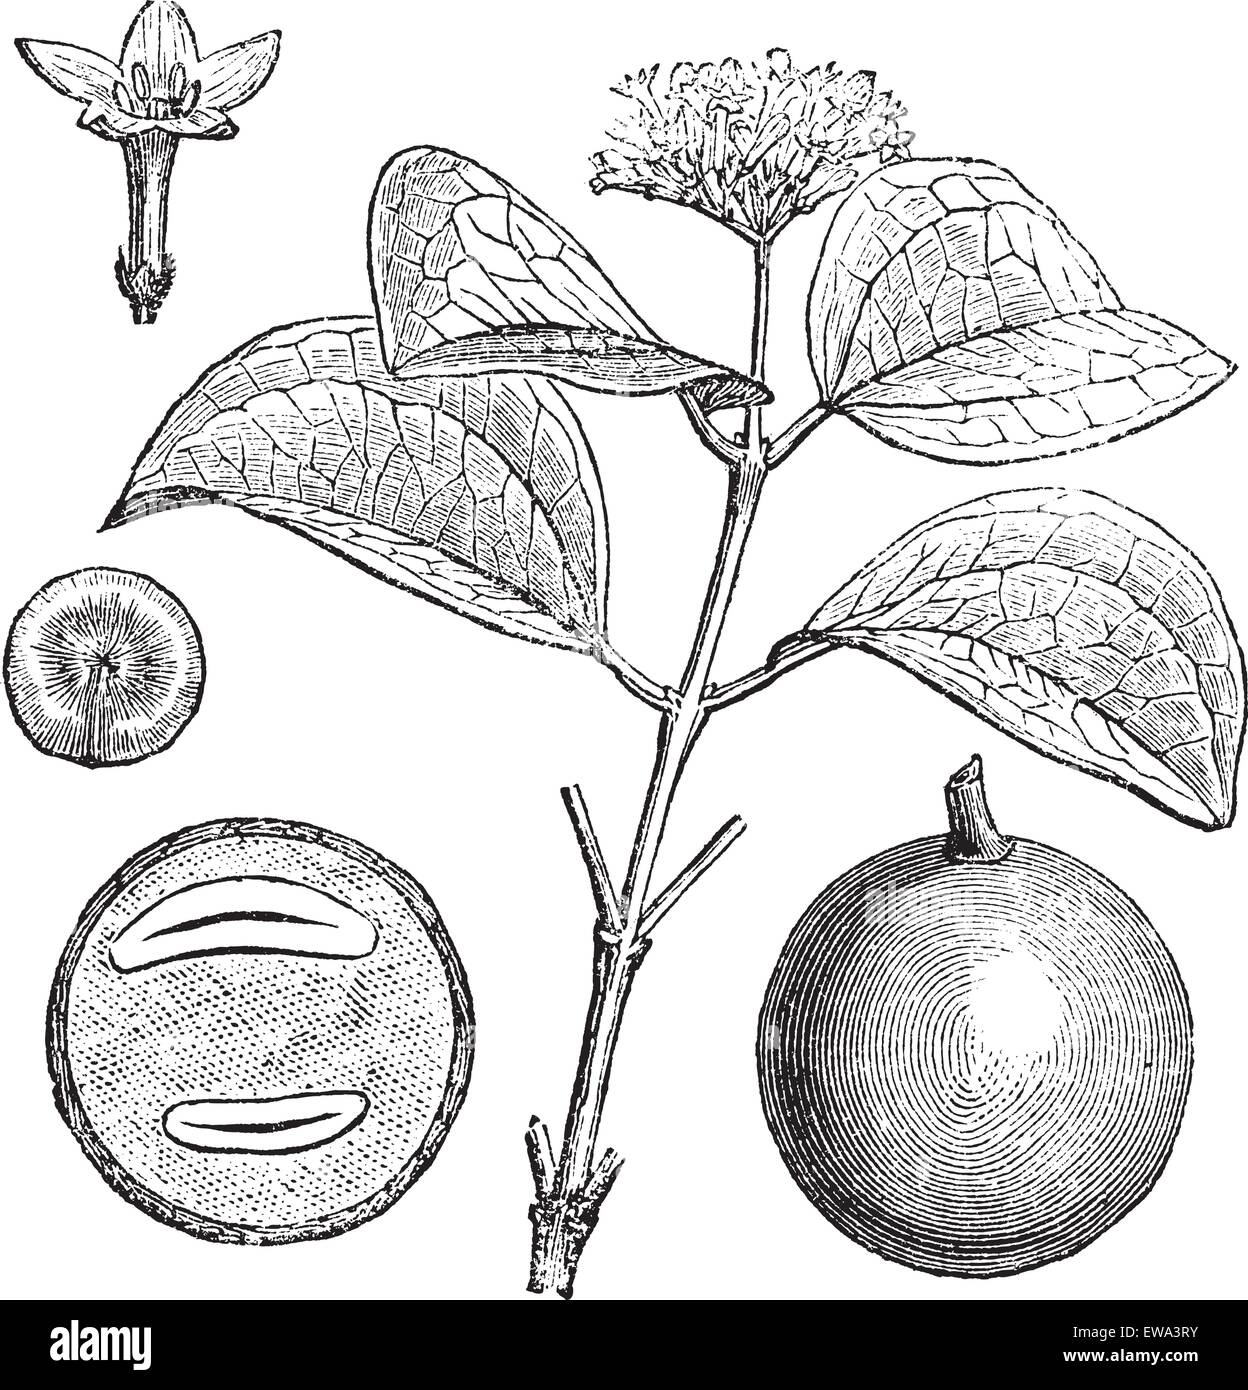 Strychnine Tree or Strychnos nux-vomica, showing flowers (top) and fruits (bottom), vintage engraved illustration. Trousset encyclopedia (1886 - 1891). Stock Vector